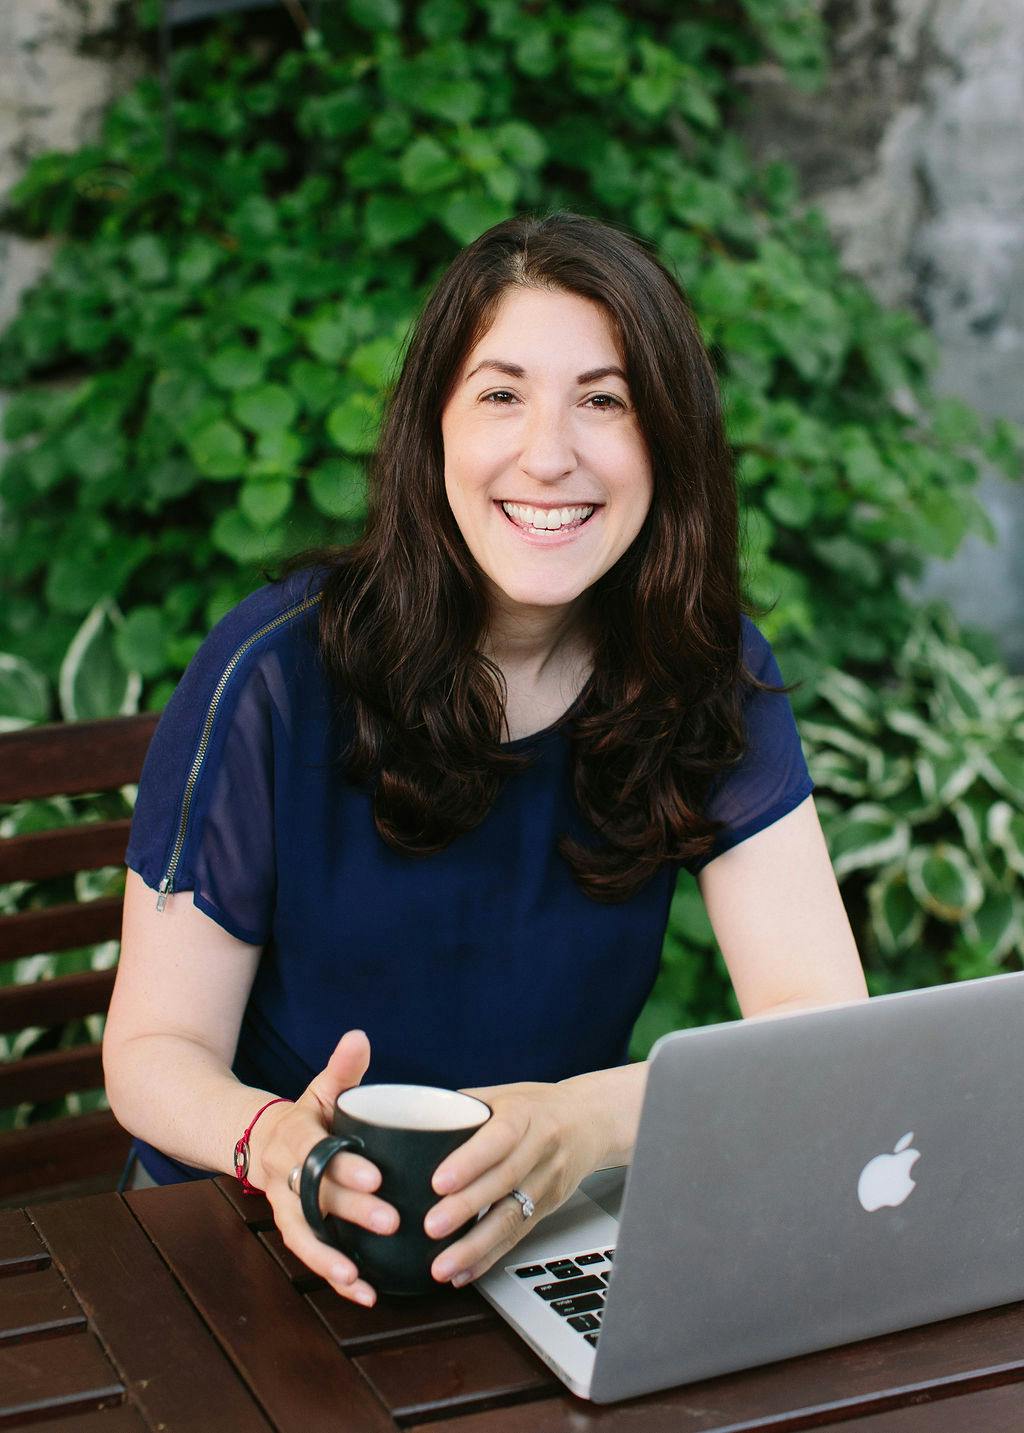 Bev sitting at a table outside with her laptop in front of her. She is smiling and has a mug in her hand. She is wearing a dark blue shirt and has long dark brown hair. There is a green tree behind her.